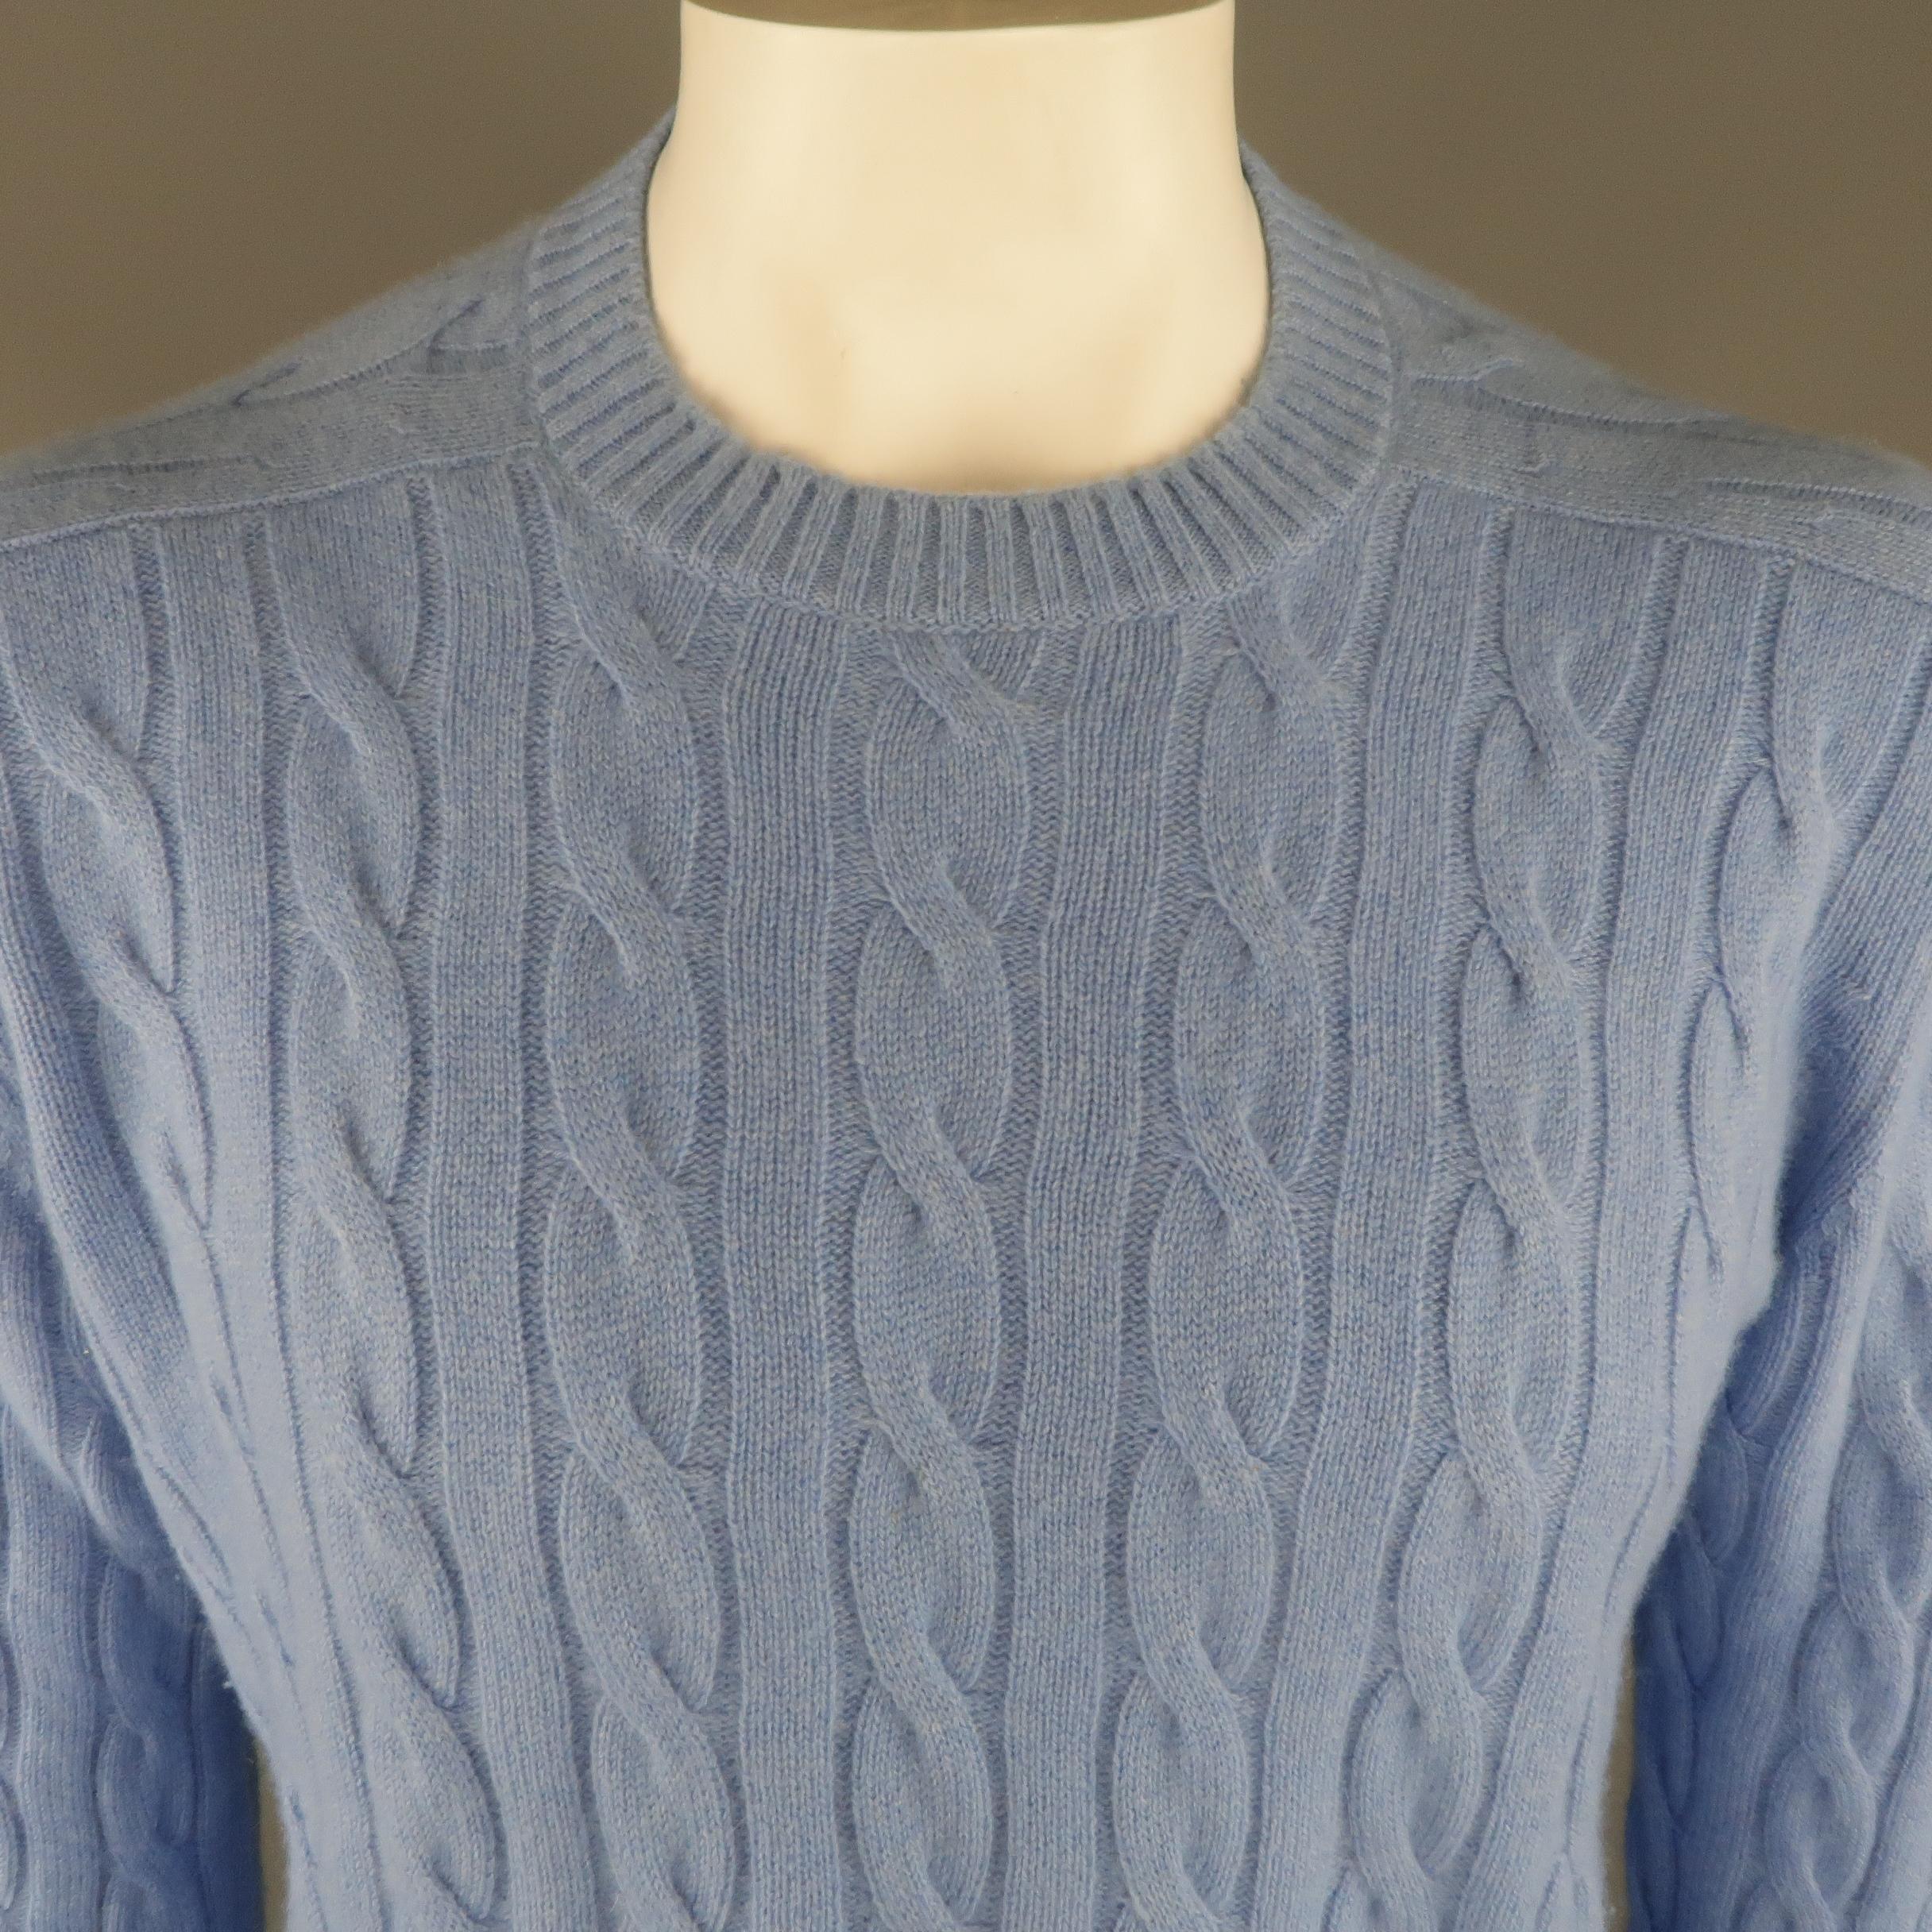 CRUCIANI pullover sweater comes in light blue cashmere cable knit with a crewneck and ribbed cuffs. Made in Italy.
 
Excellent Pre-Owned Condition.
Marked: IT 54
 
Measurements:
 
Shoulder: 19 in.
Chest: 50 in.
Sleeve: 26 in.
Length: 28 in.